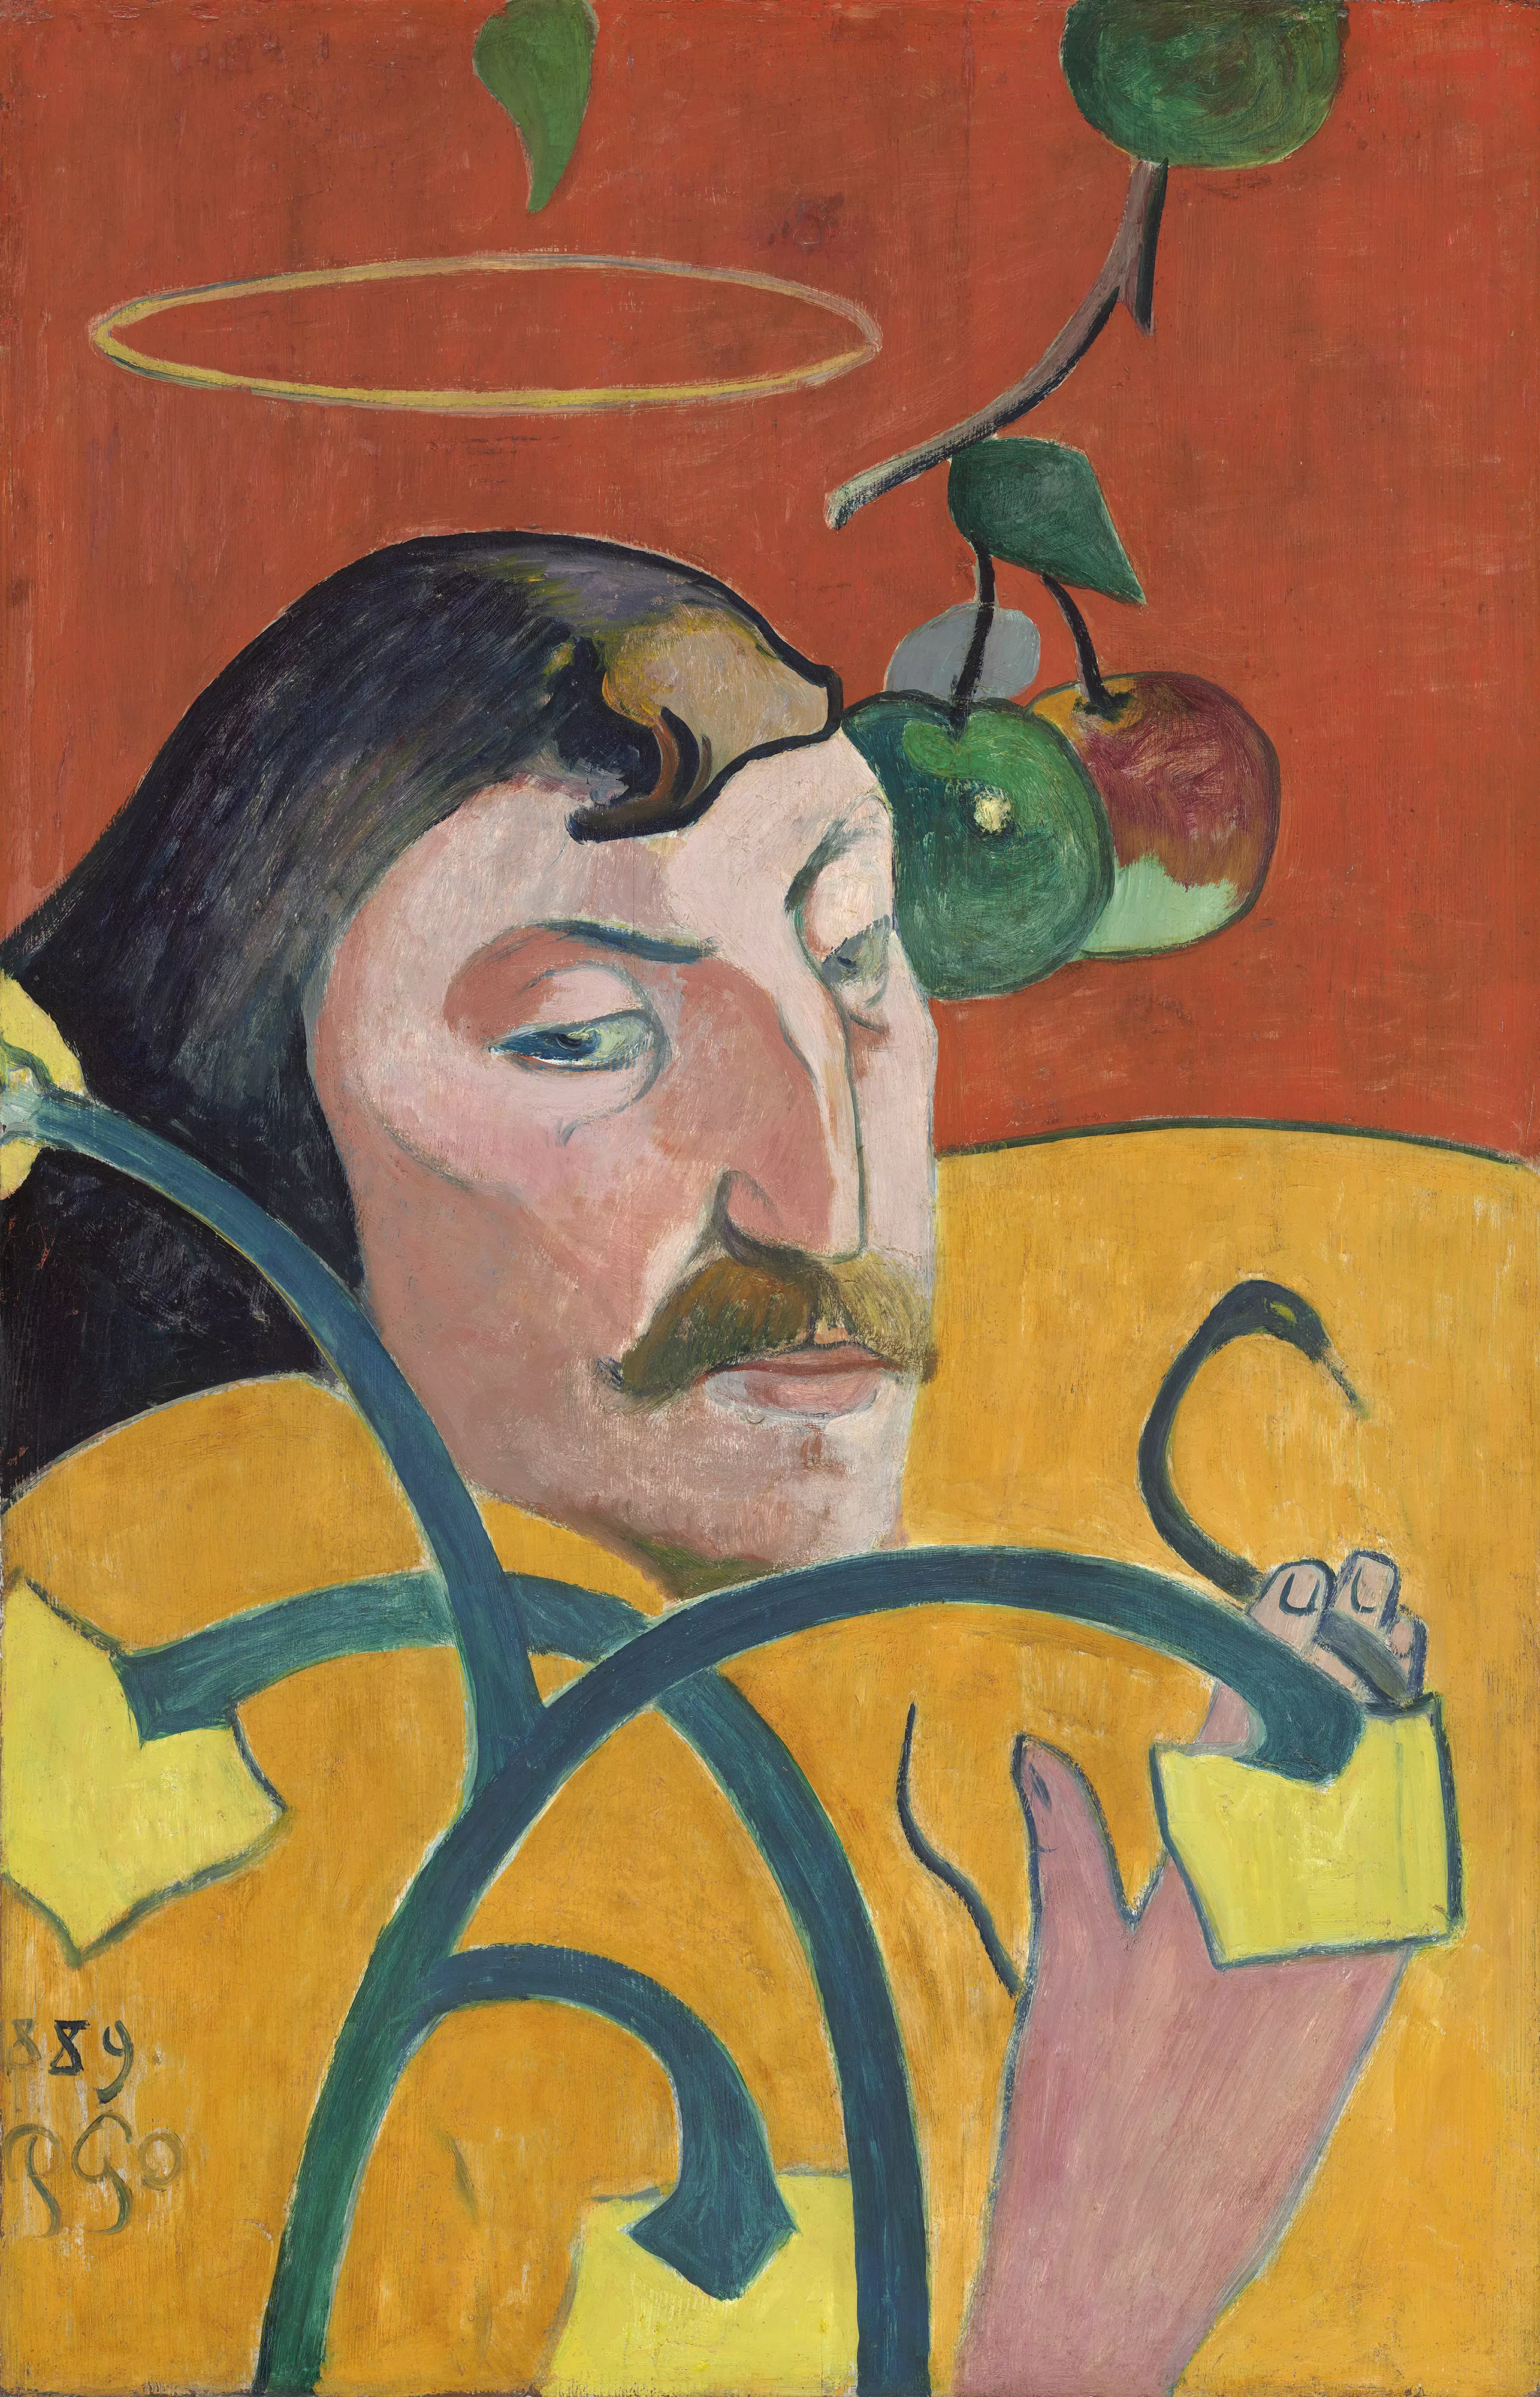 Self-Portrait with Halo and Snake, Paul Gauguin